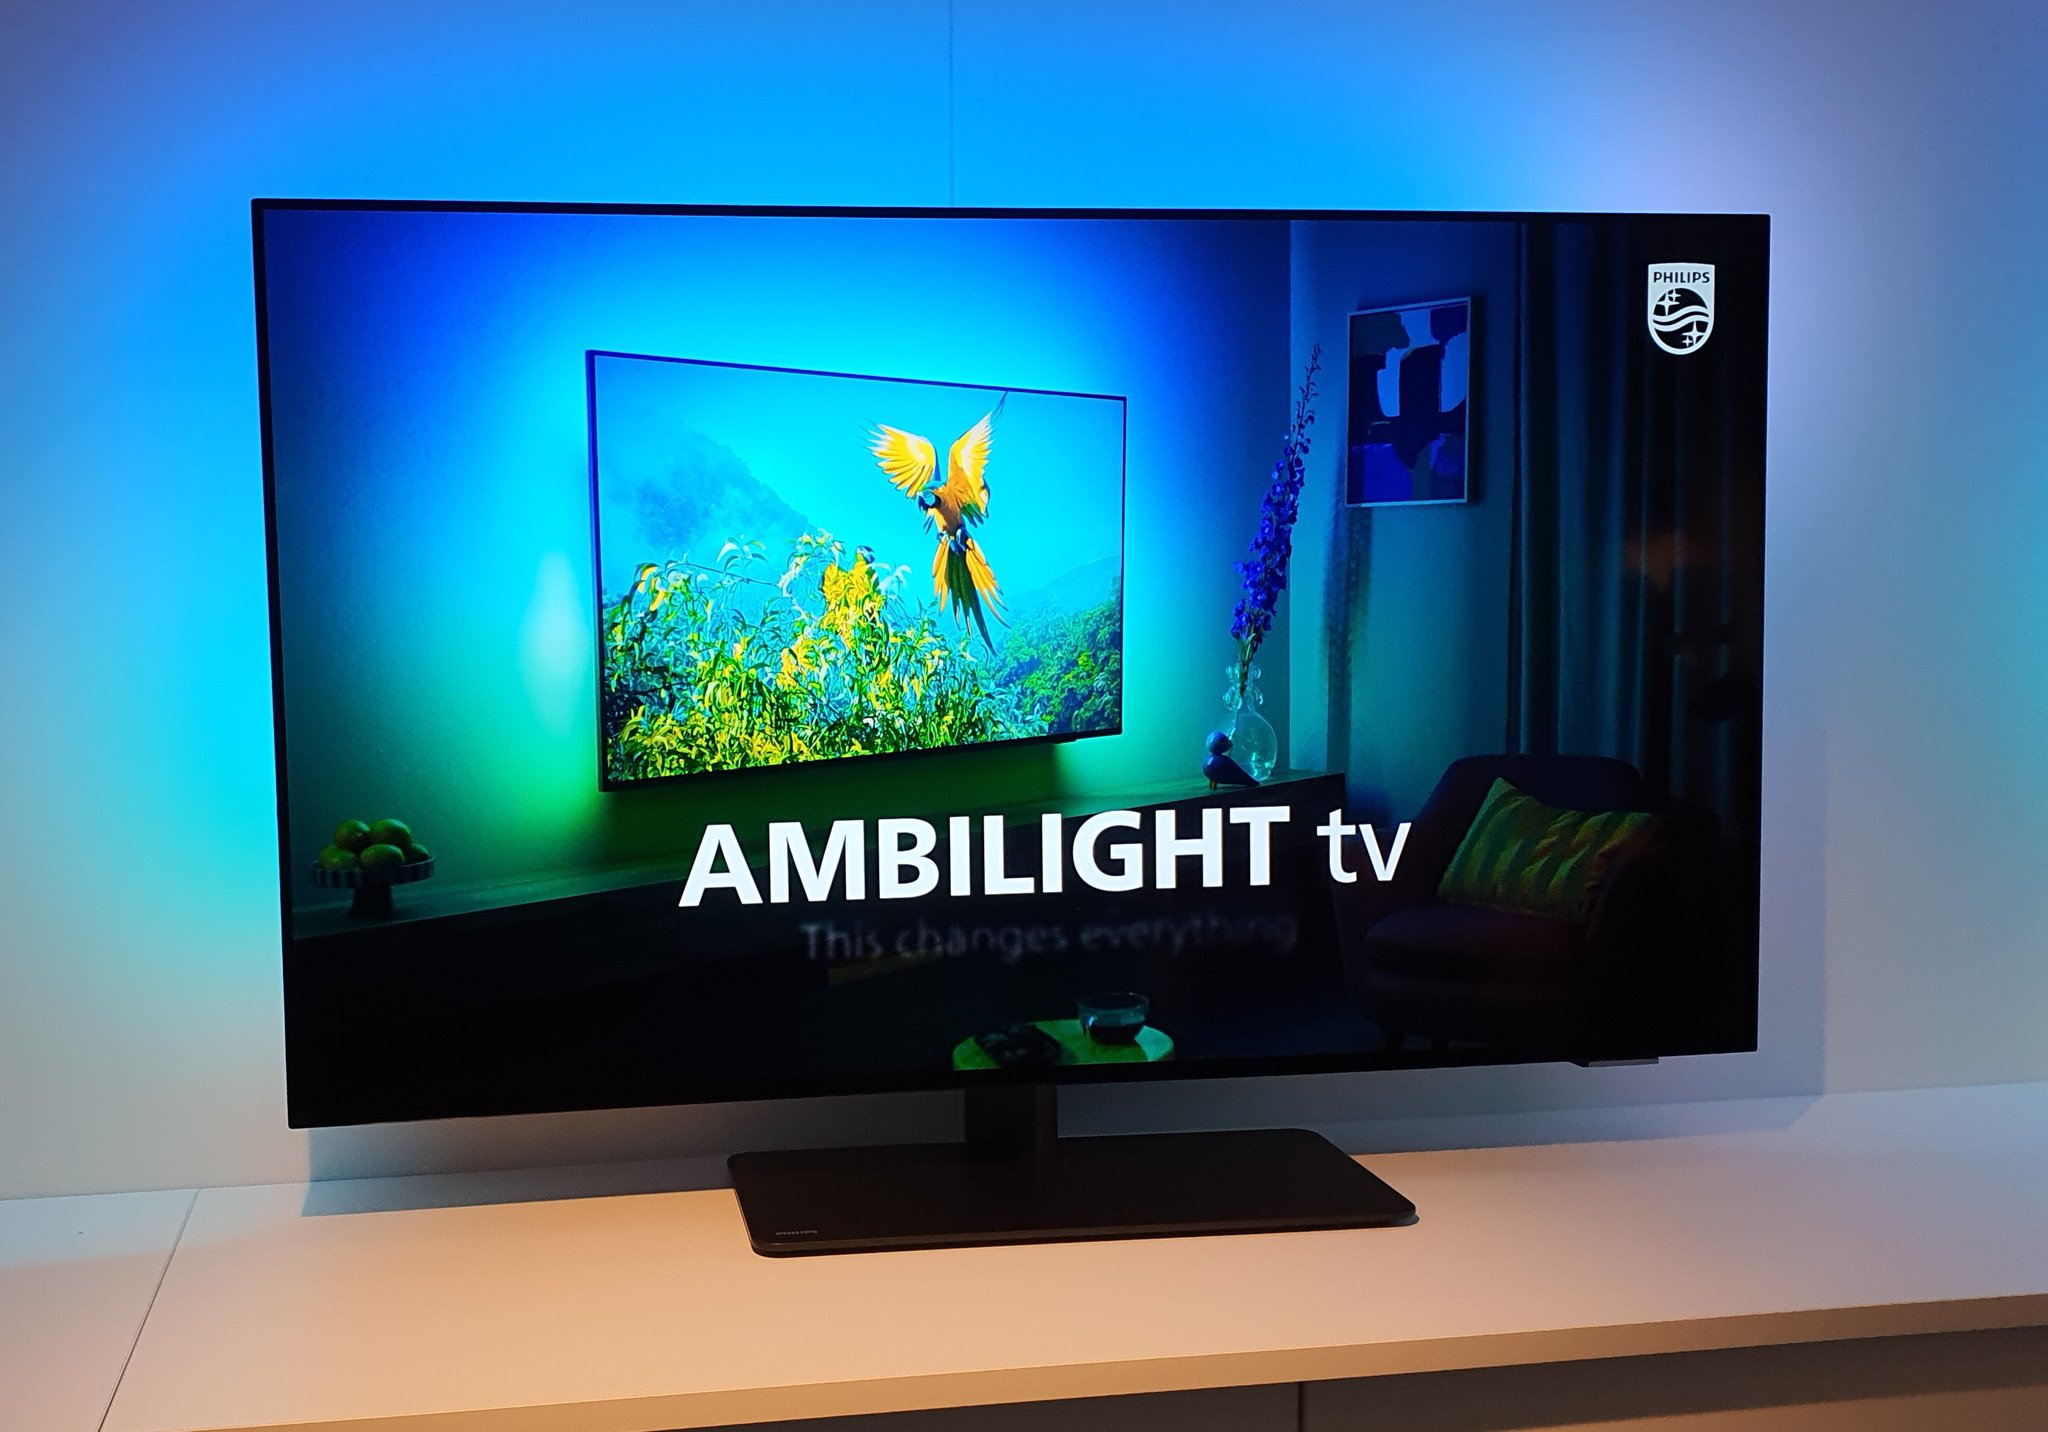 Vincent Teoh on Twitter: "Just clapped eyes on the Philips 42OLED808, world's first 42-inch OLED TV with Ambilight. https://t.co/eNPtPKaQtB" / Twitter